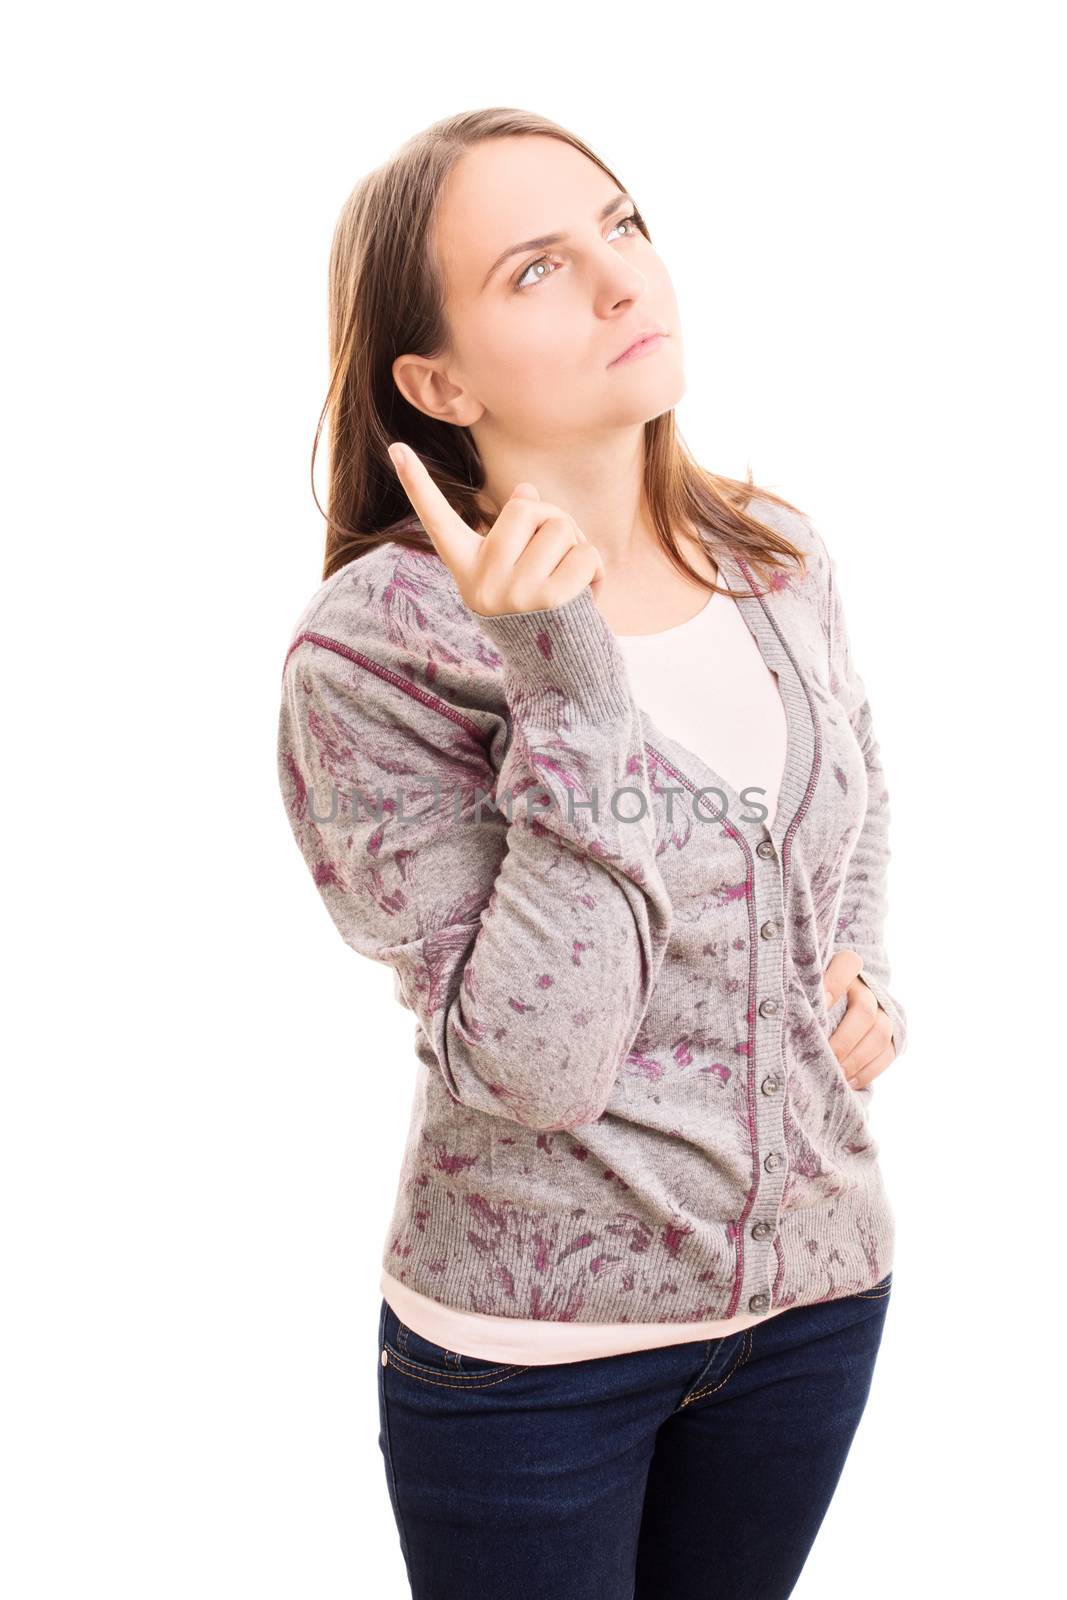 Beautiful young girl holding her point finger up thinking about something, isolated on white background.